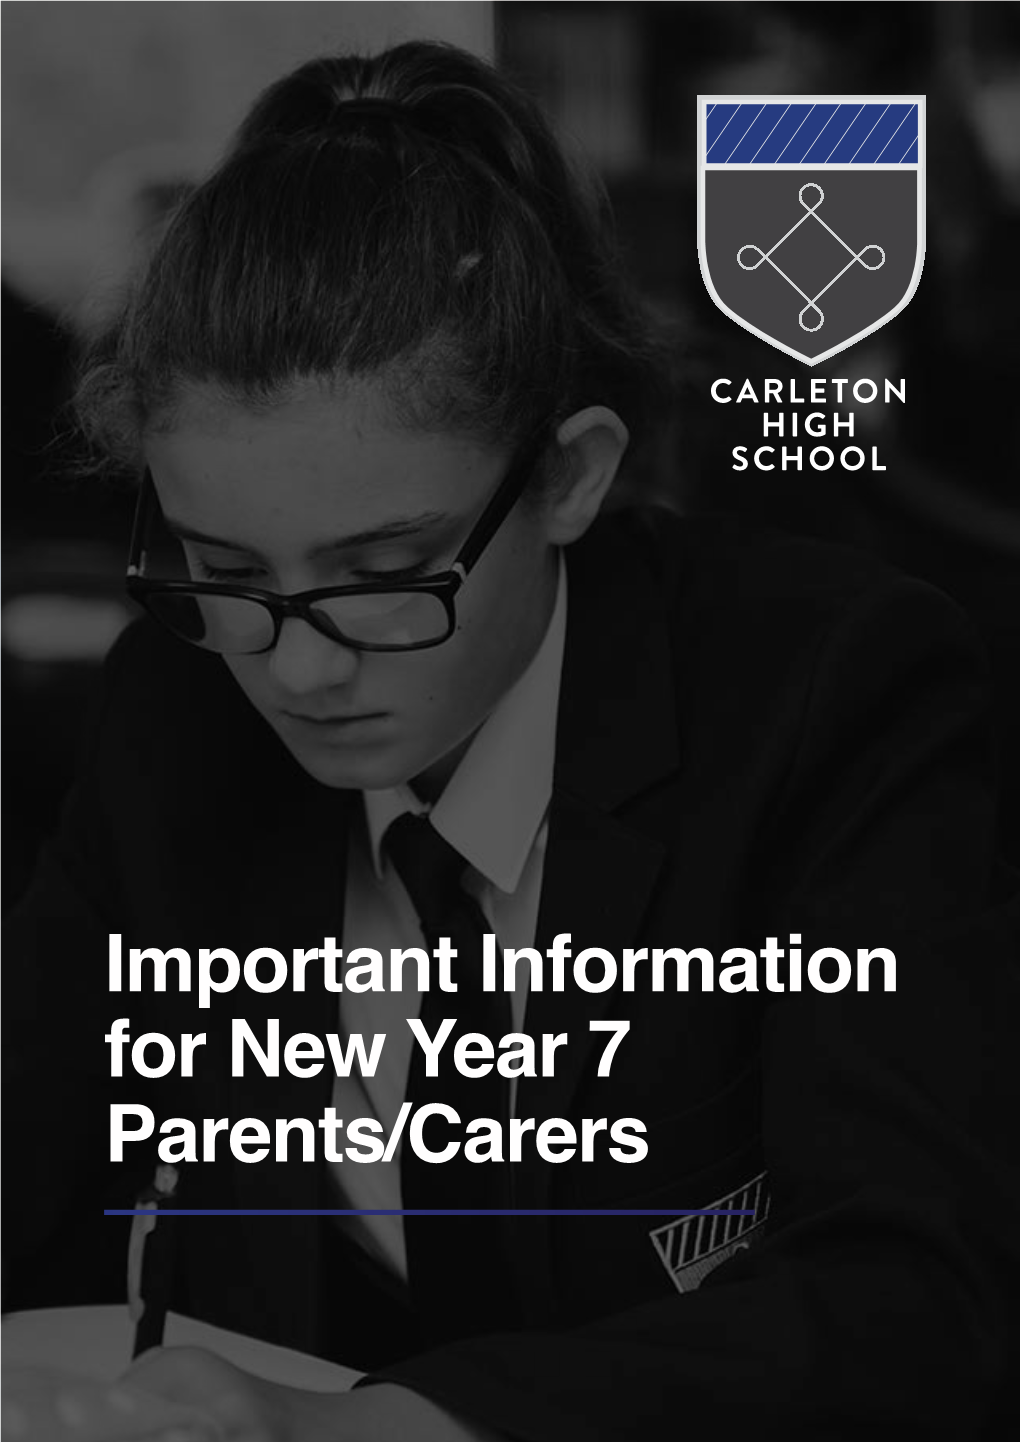 Important Information for New Year 7 Parents/Carers